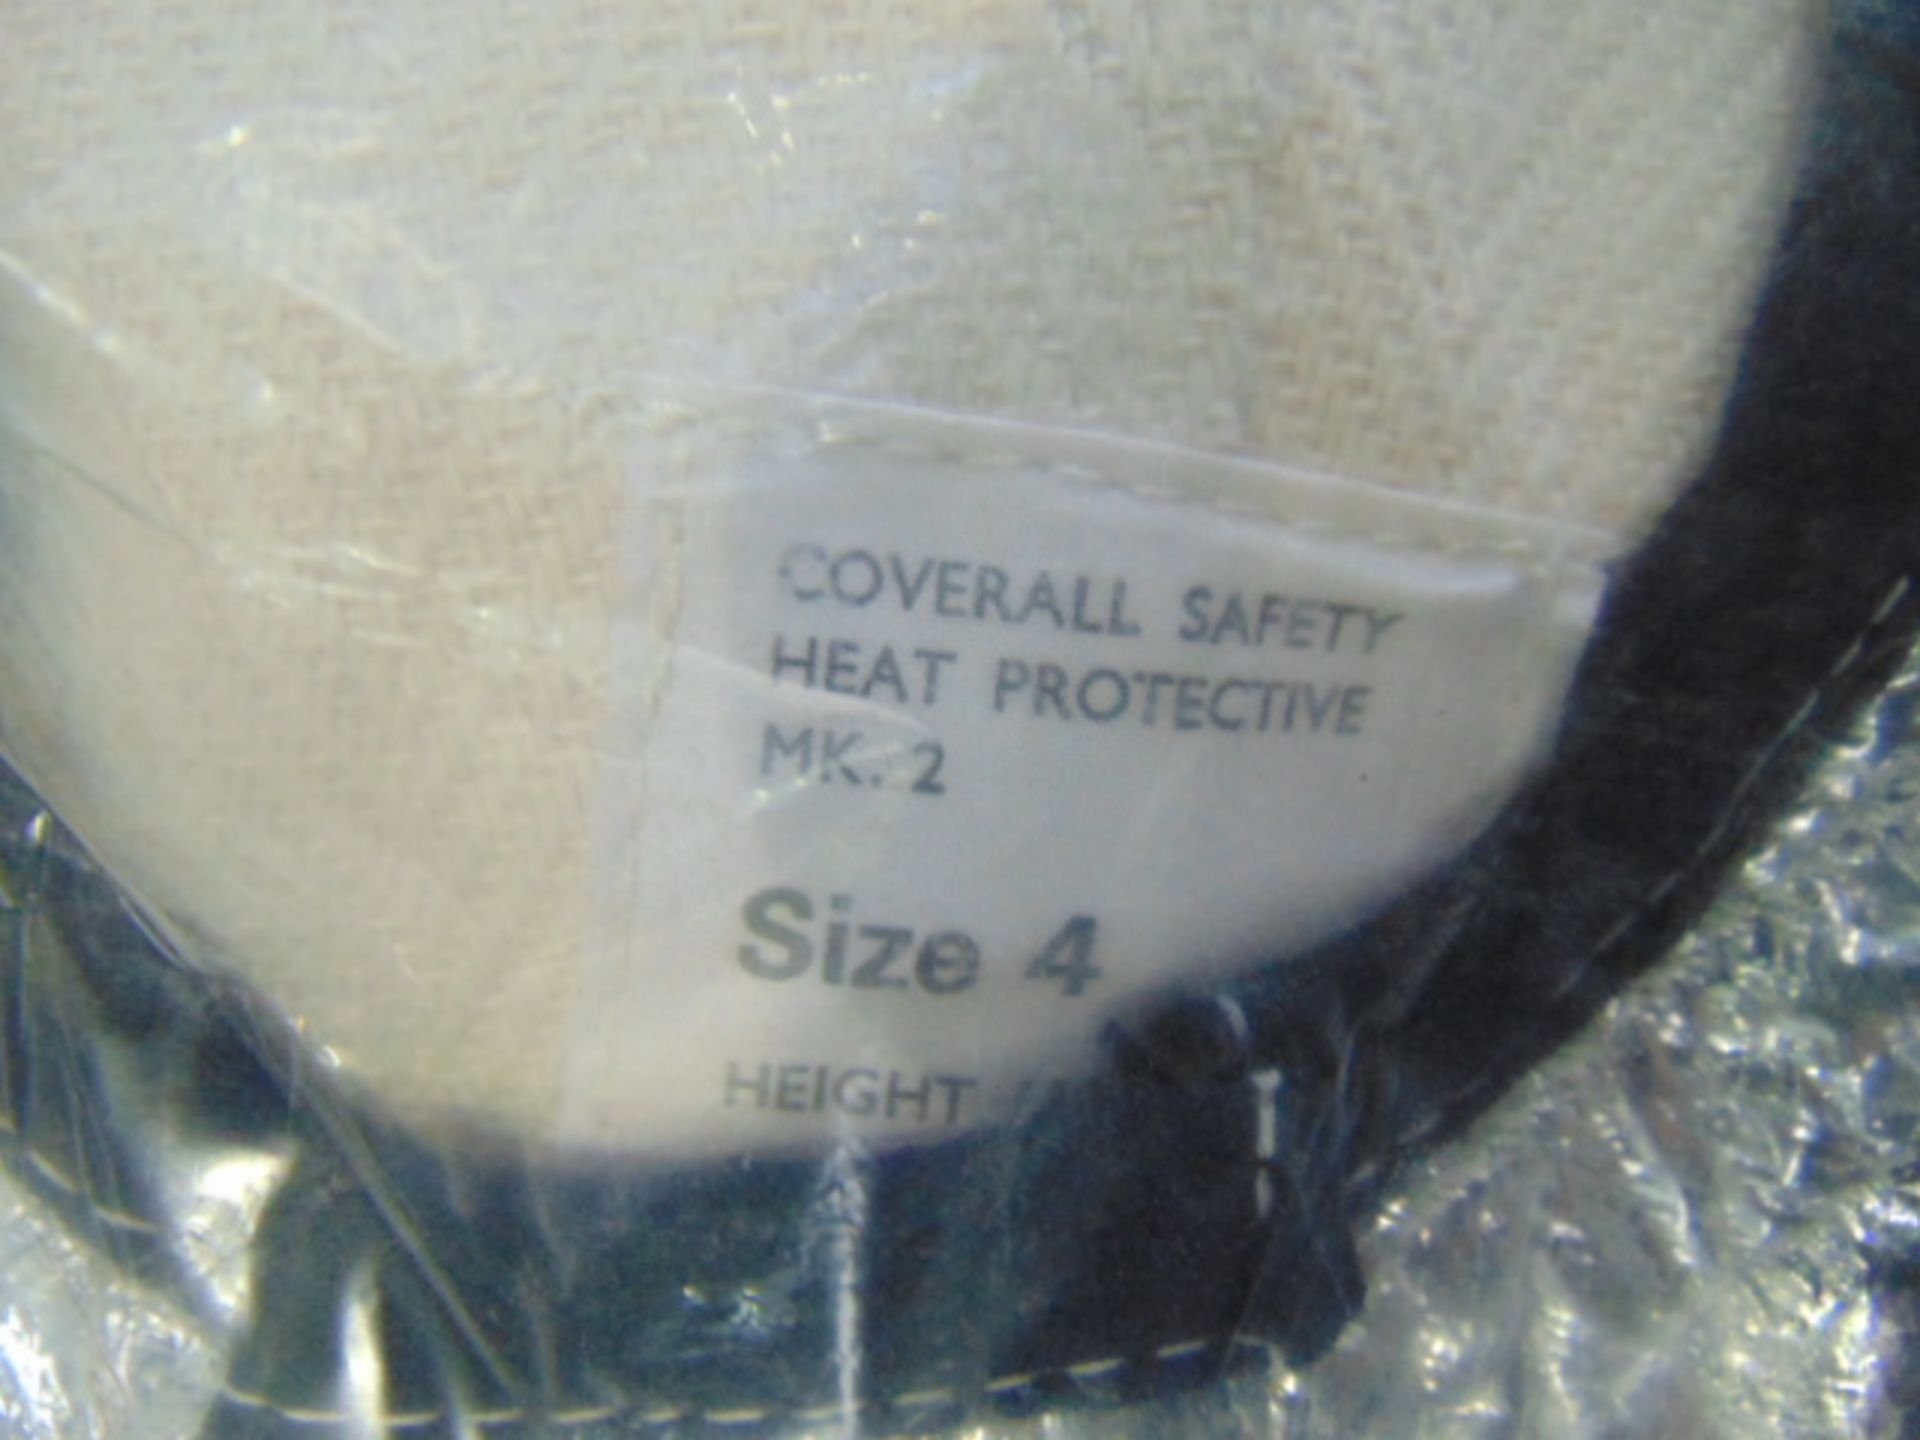 2 x Unissued Mk.2 Heat Protective Safety Coverall. - Image 3 of 3